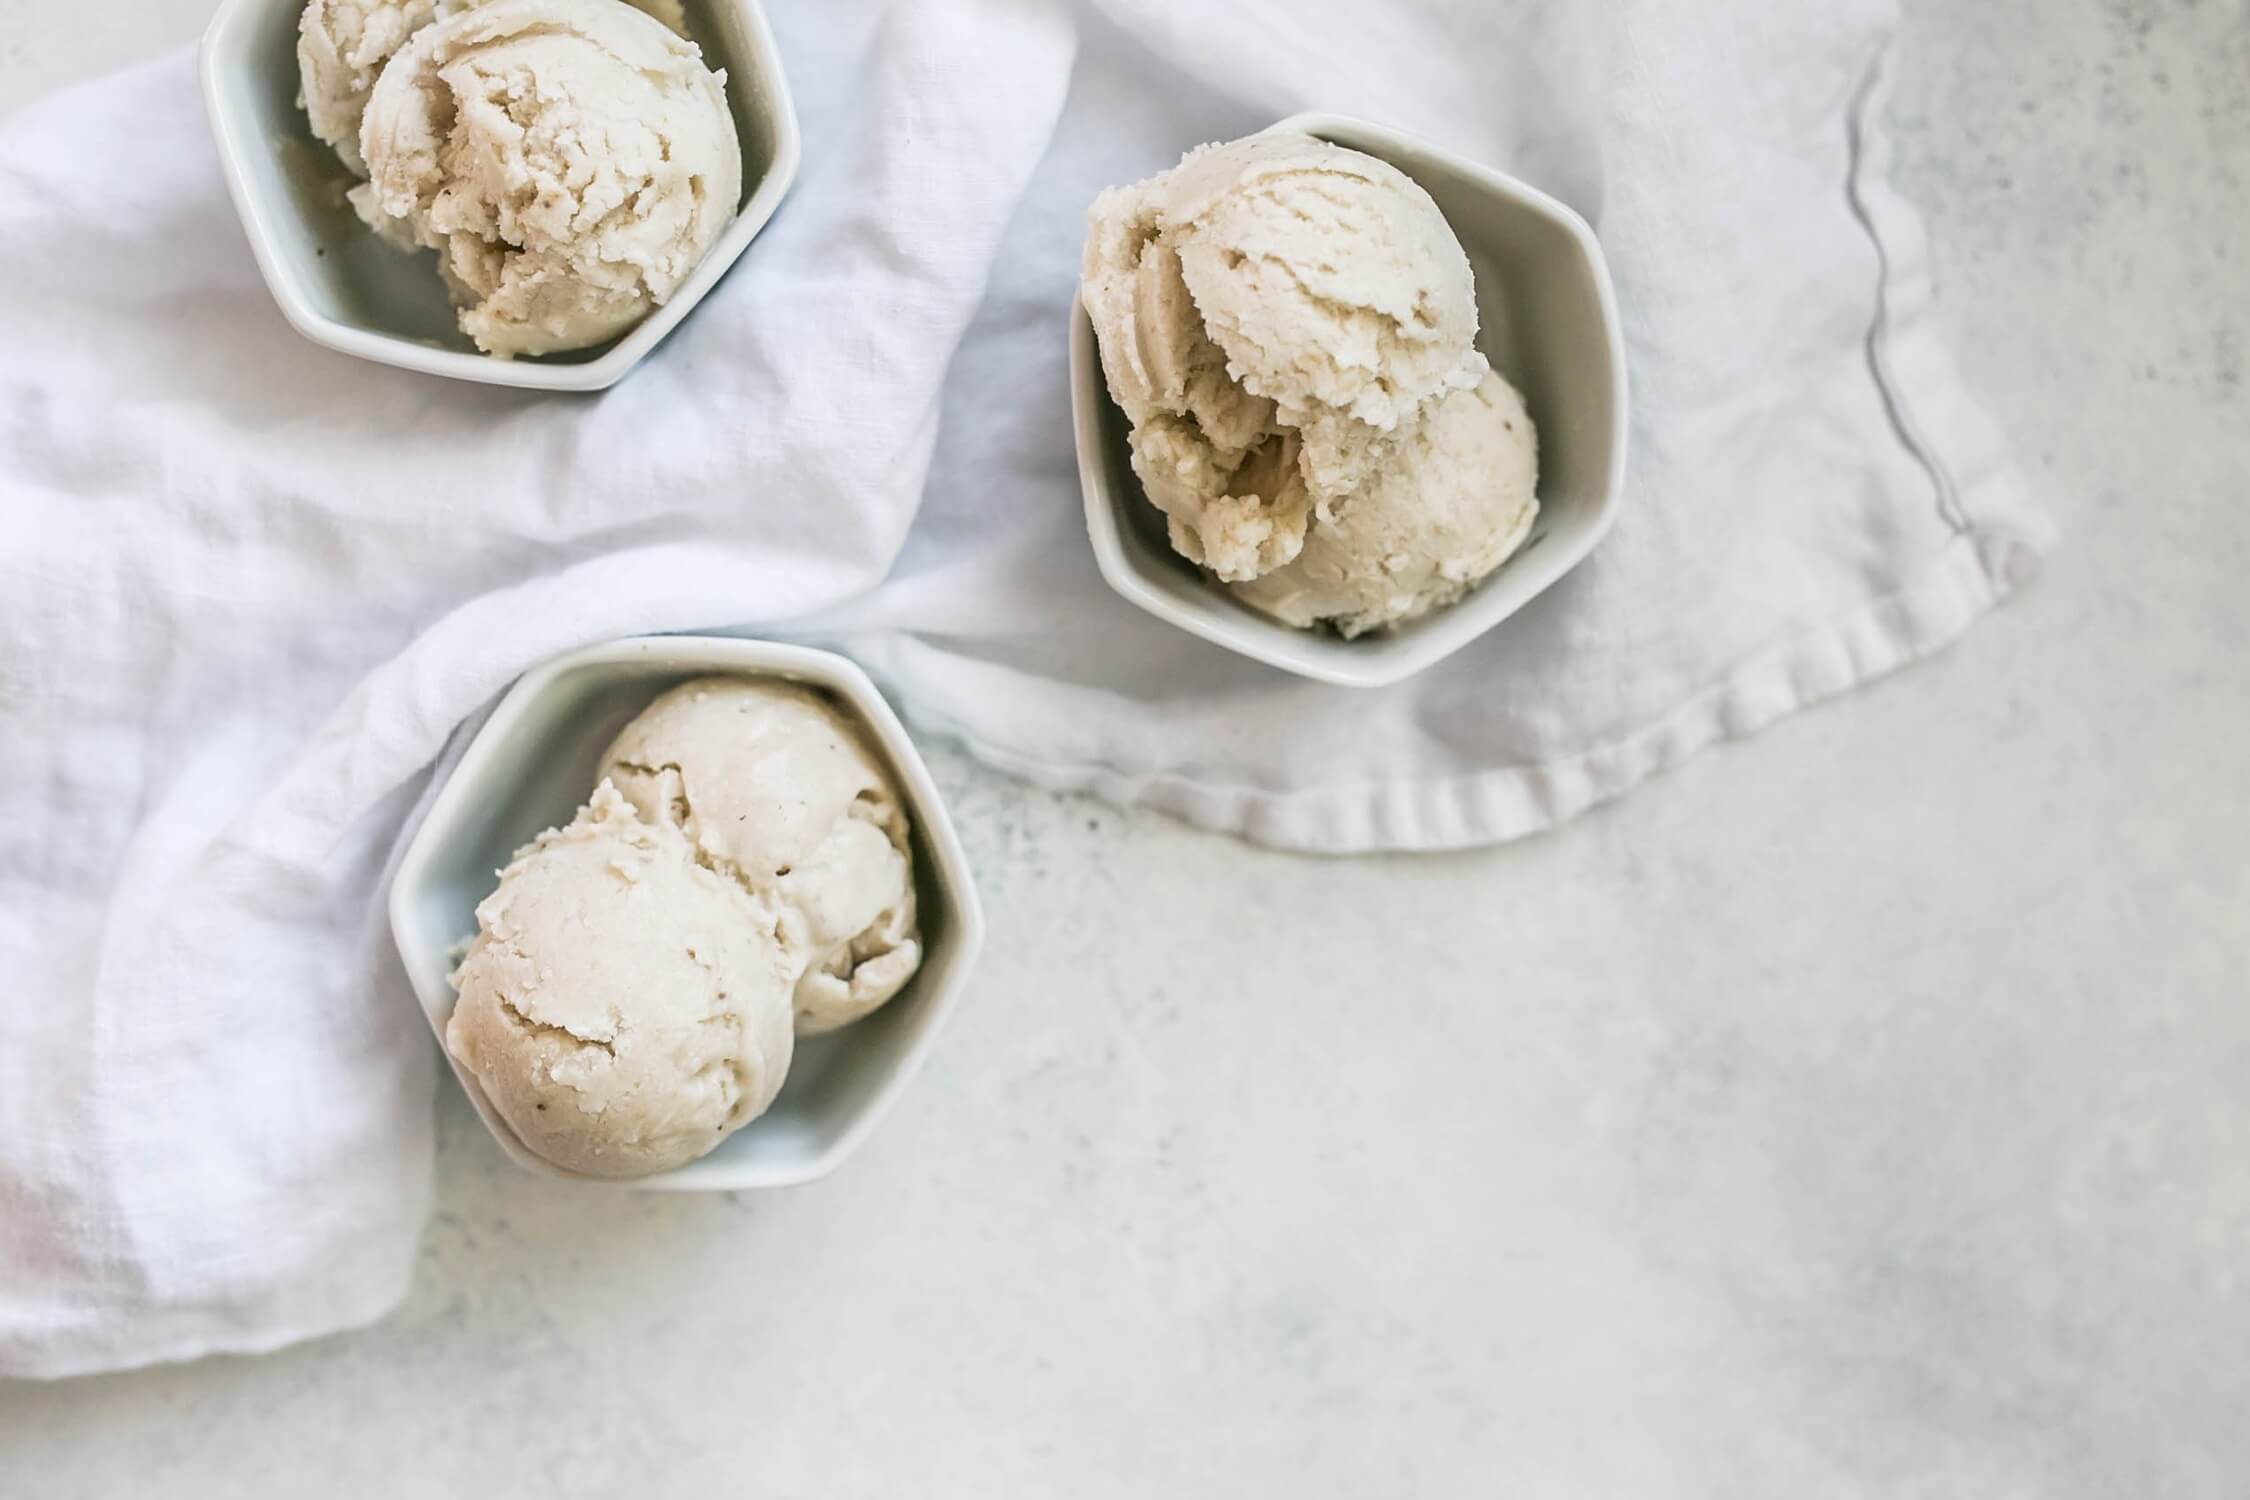 20 Family-Friendly Meals Your Clients Will Love: Coconut Banana Ice Cream